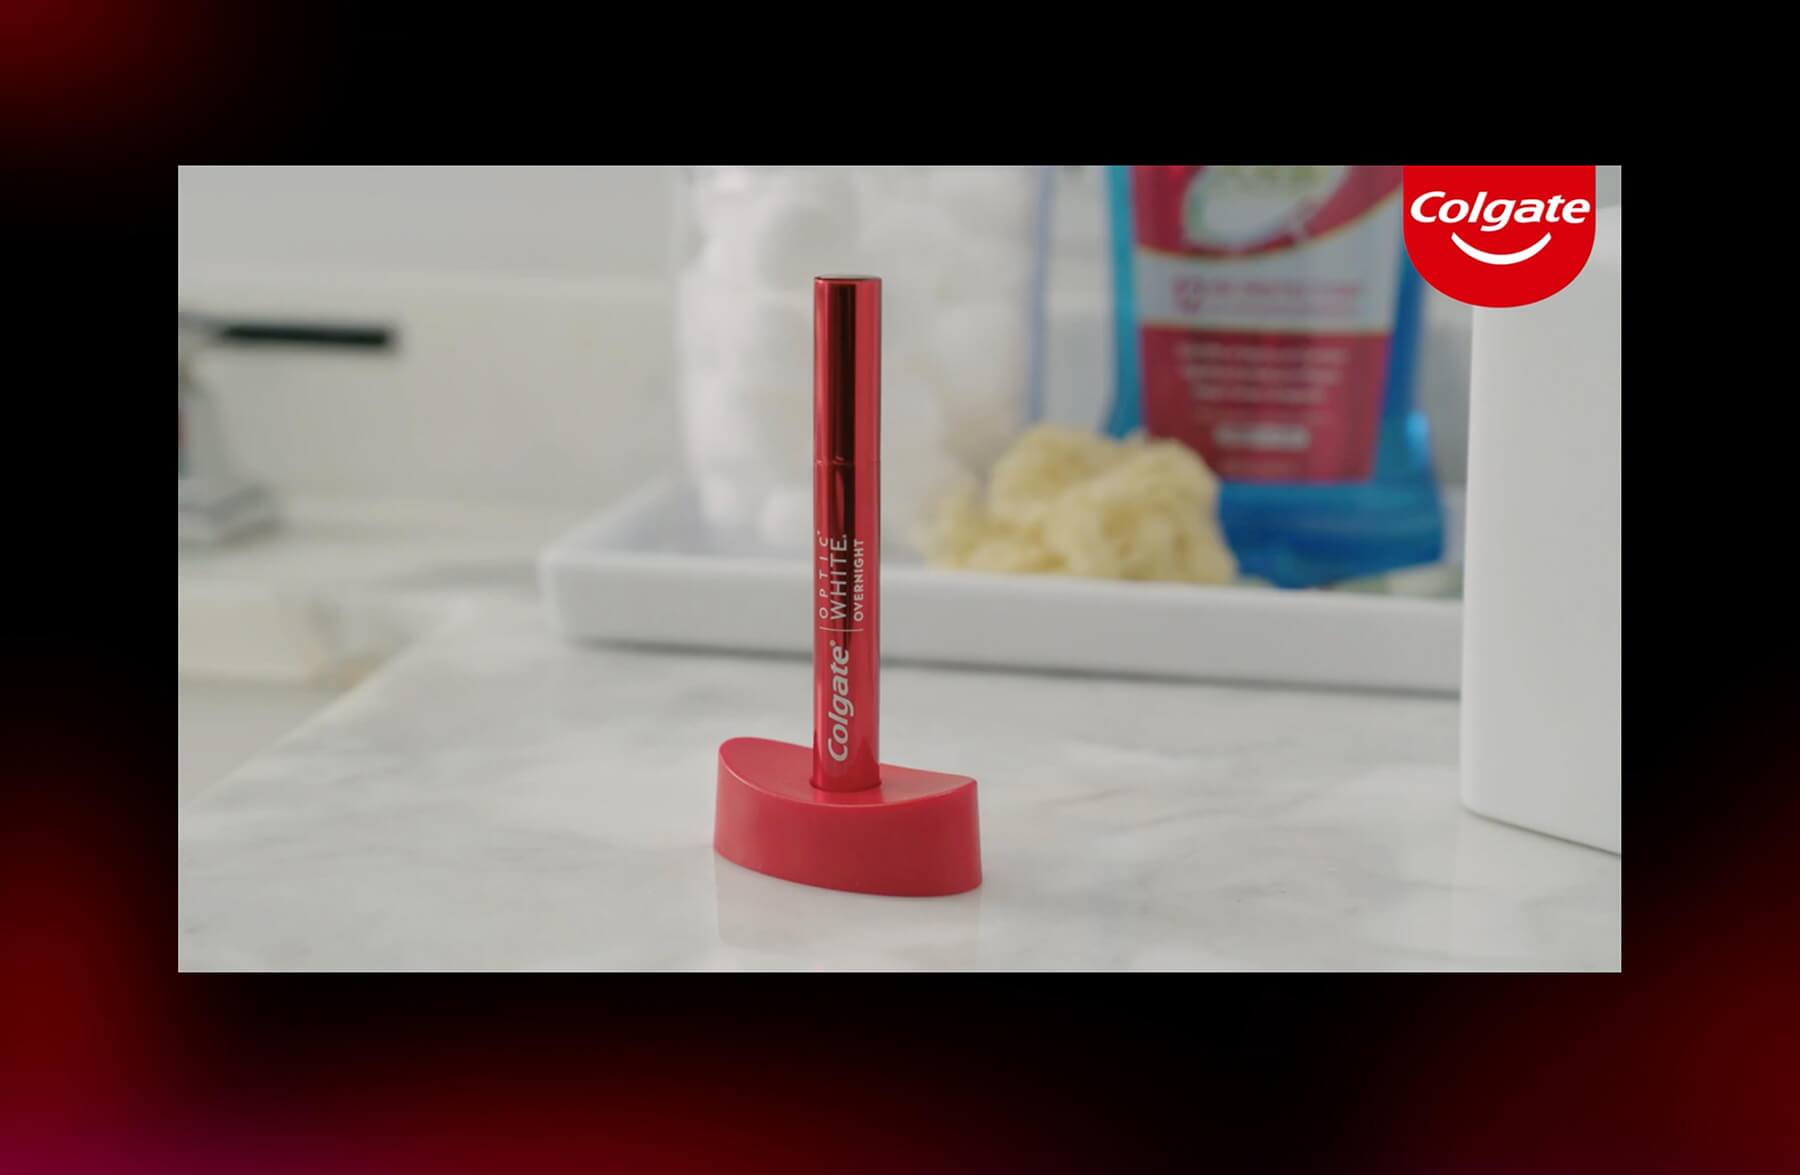 Video instruction on how to use the Colgate Optic White Overnight Teeth Whitening Treatment Pen